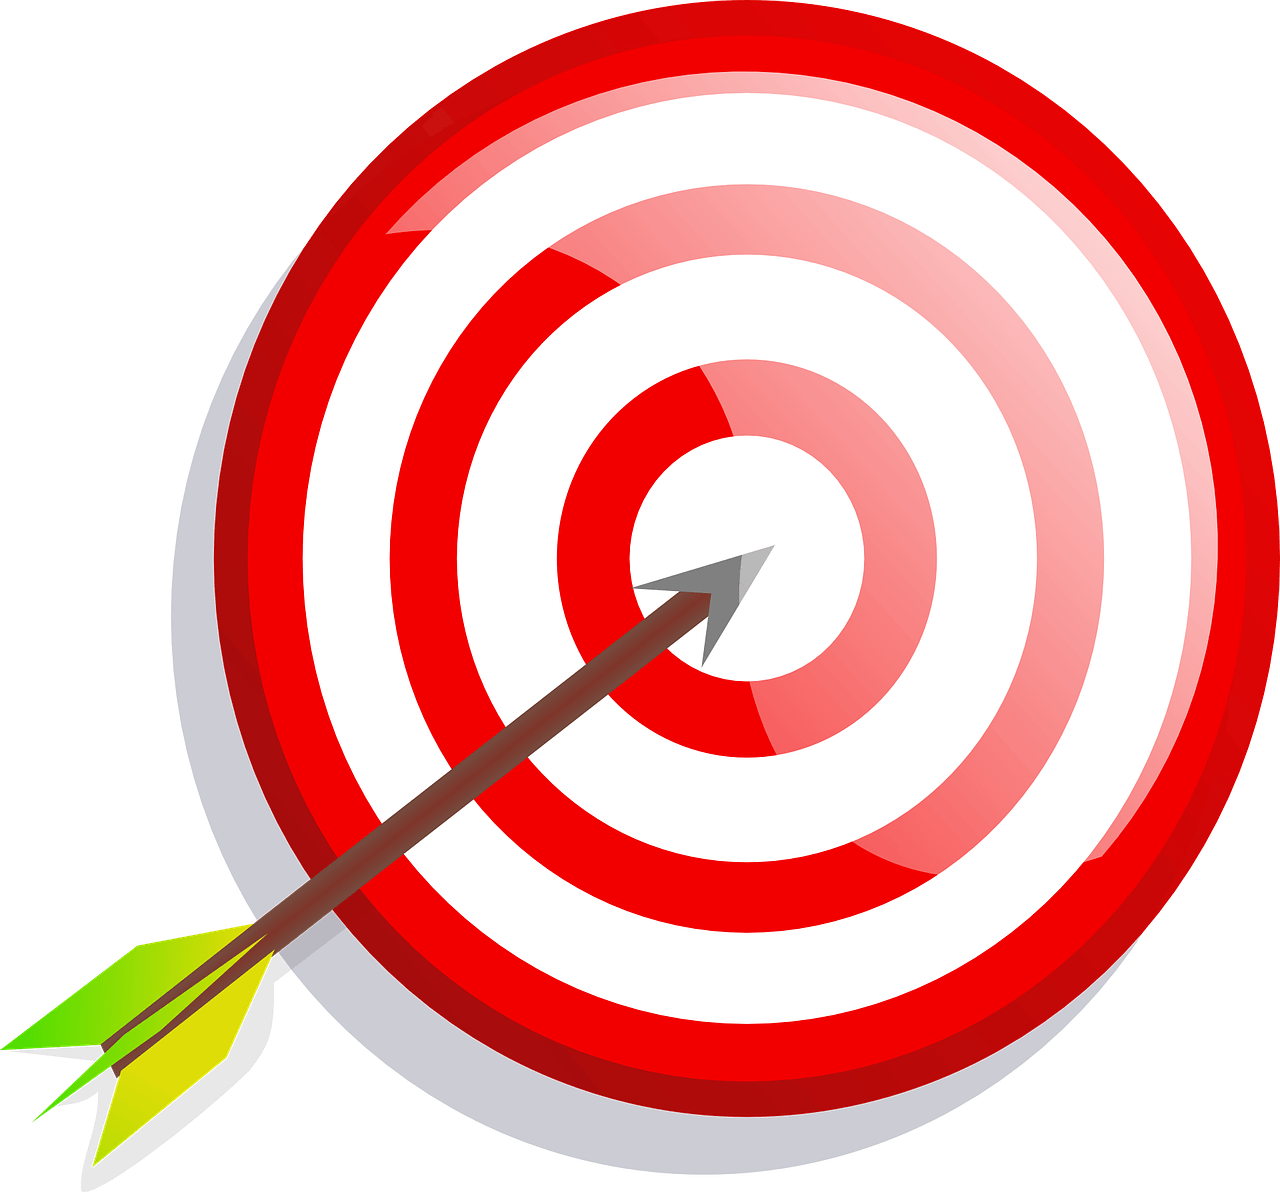 Png images free download. Focus clipart target arrow